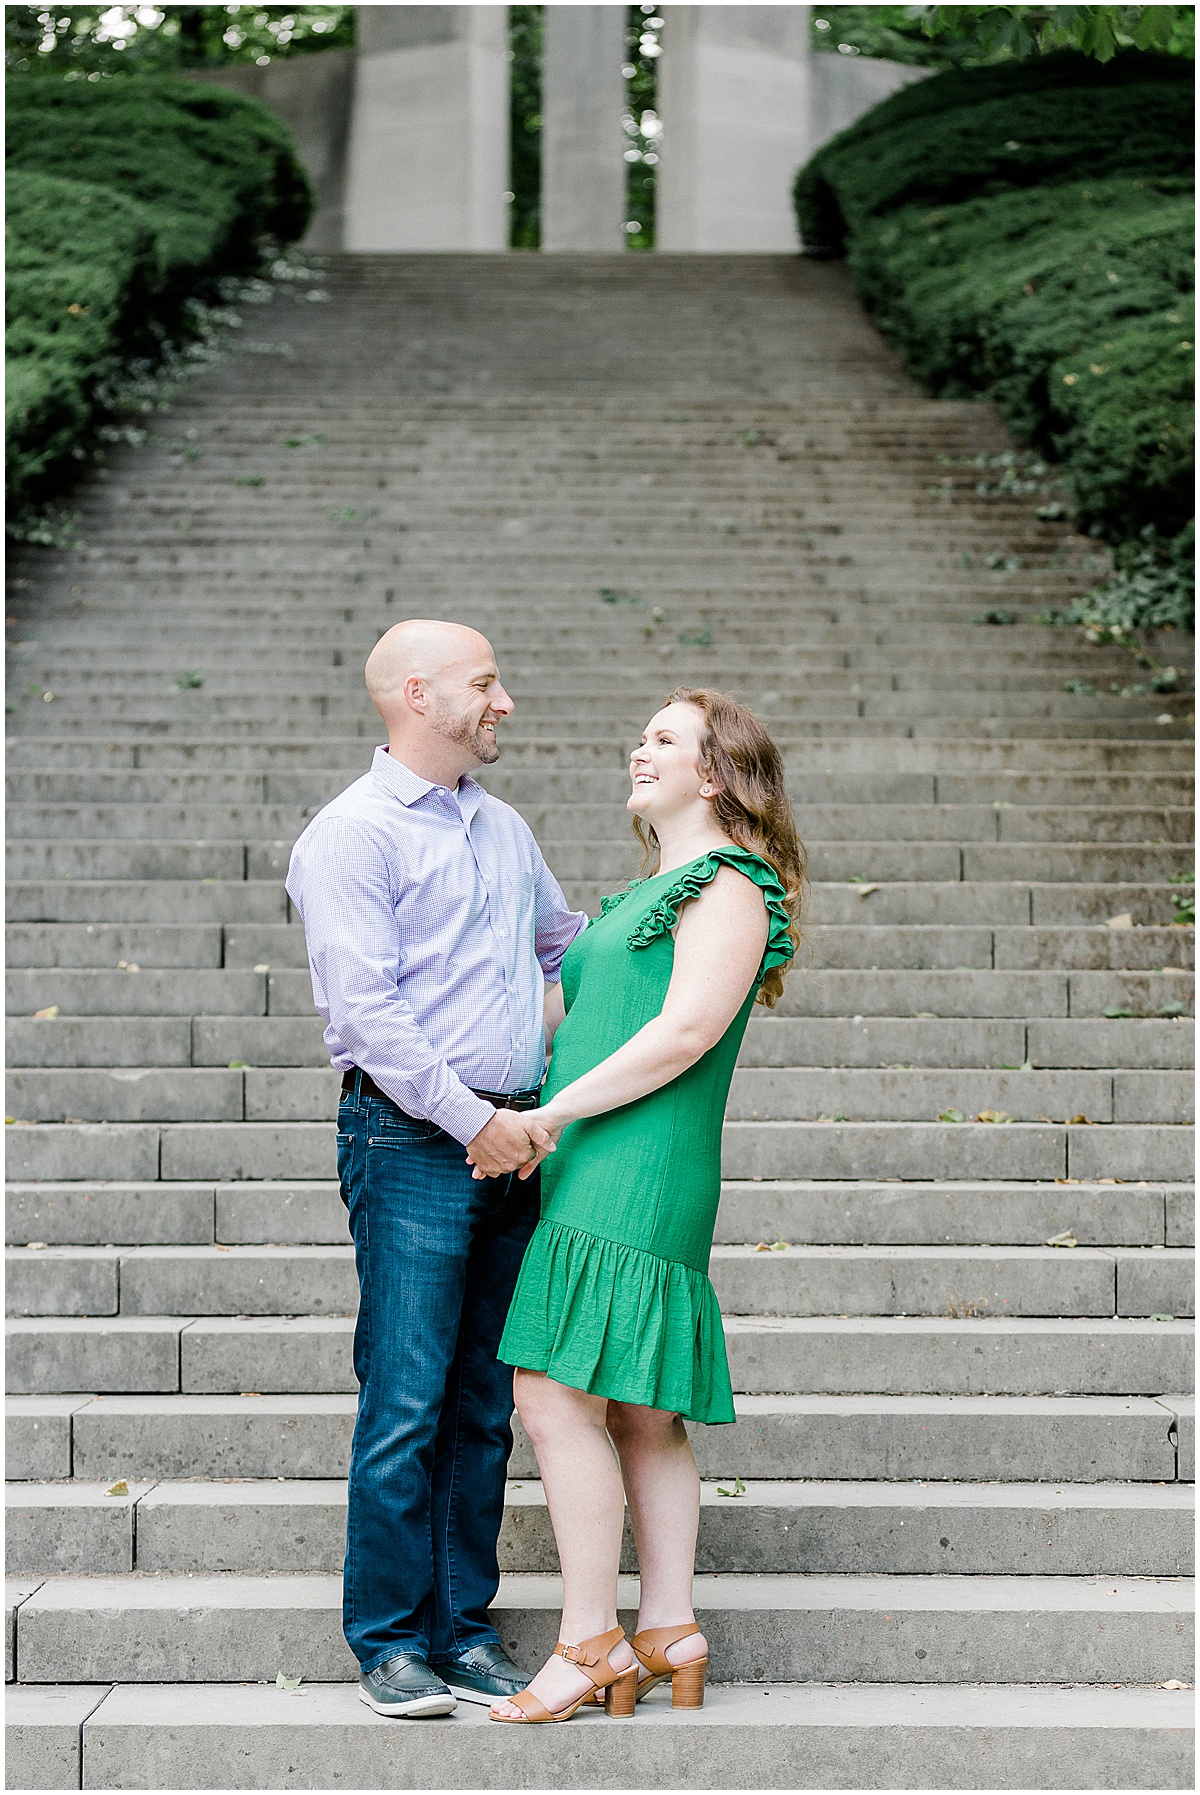 Maura and John’s summer Holcomb Gardens engagement photos in Indianapolis, IN